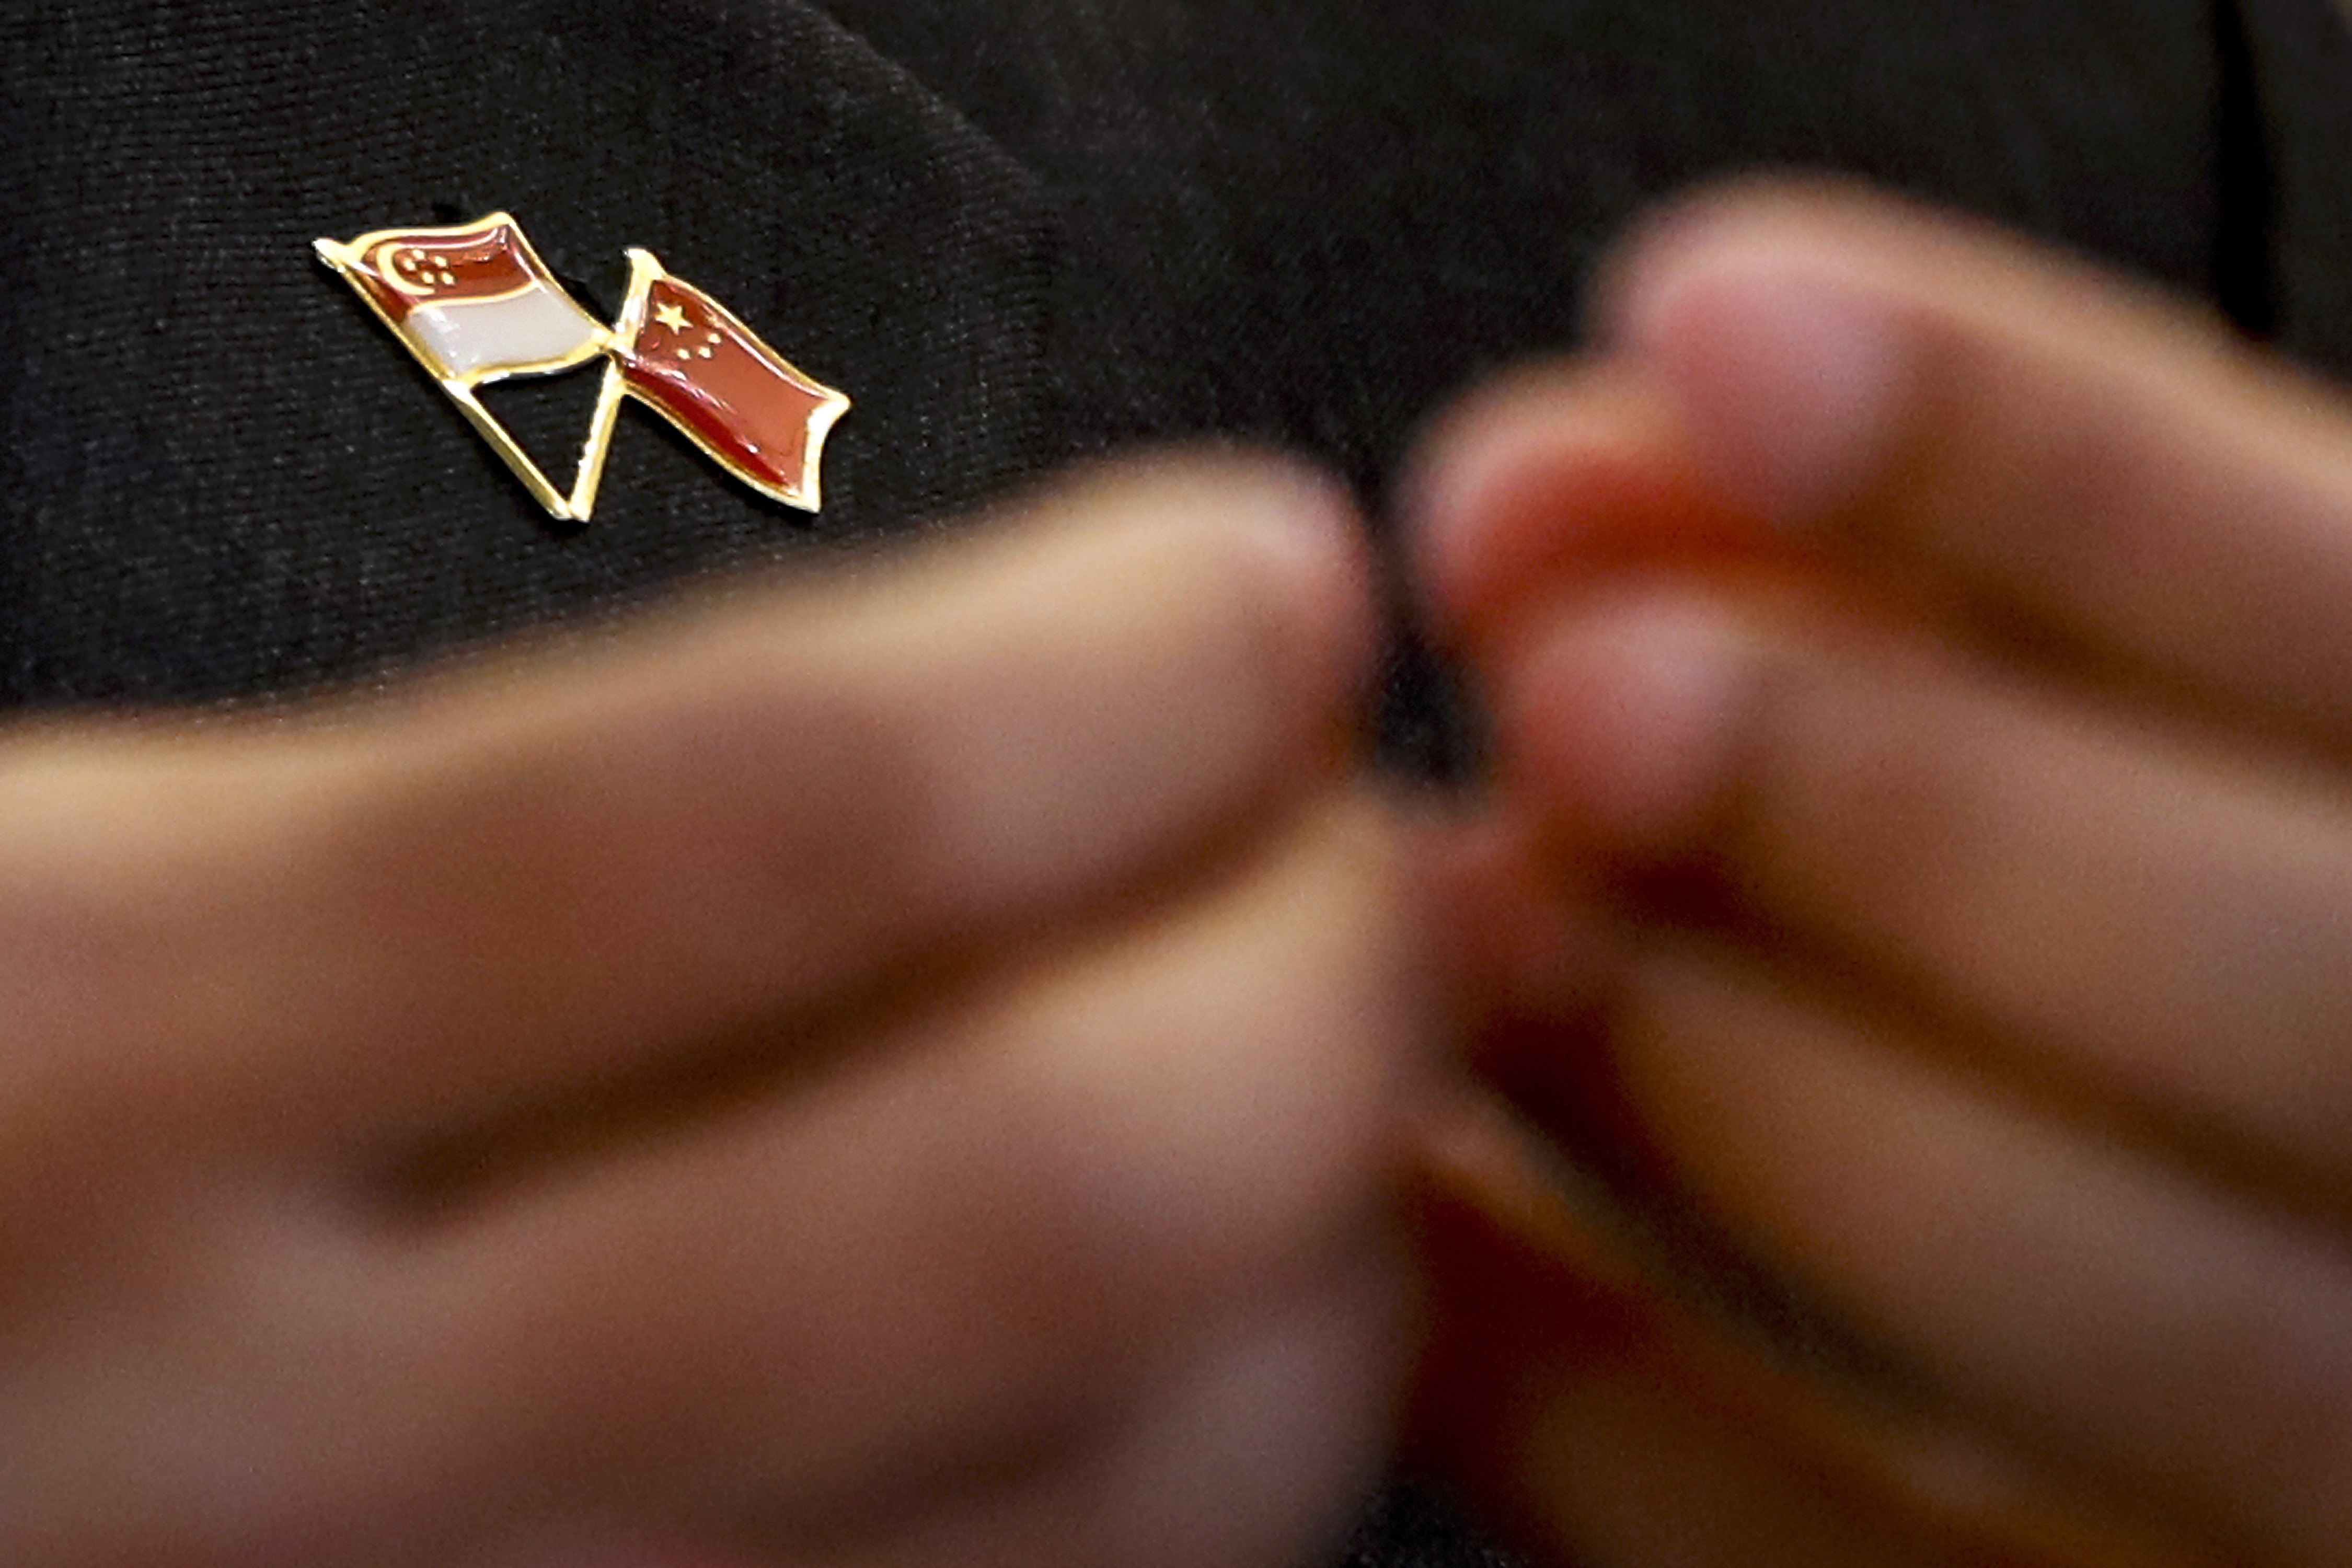 A pin bearing the Singapore and Chinese national flags is worn by Singapore’s Foreign Minister Vivian Balakrishnan, during a joint press conference with Chinese Foreign Minister Wang Yi last month at the Ministry of Foreign Affairs in Beijing. Photo: AP